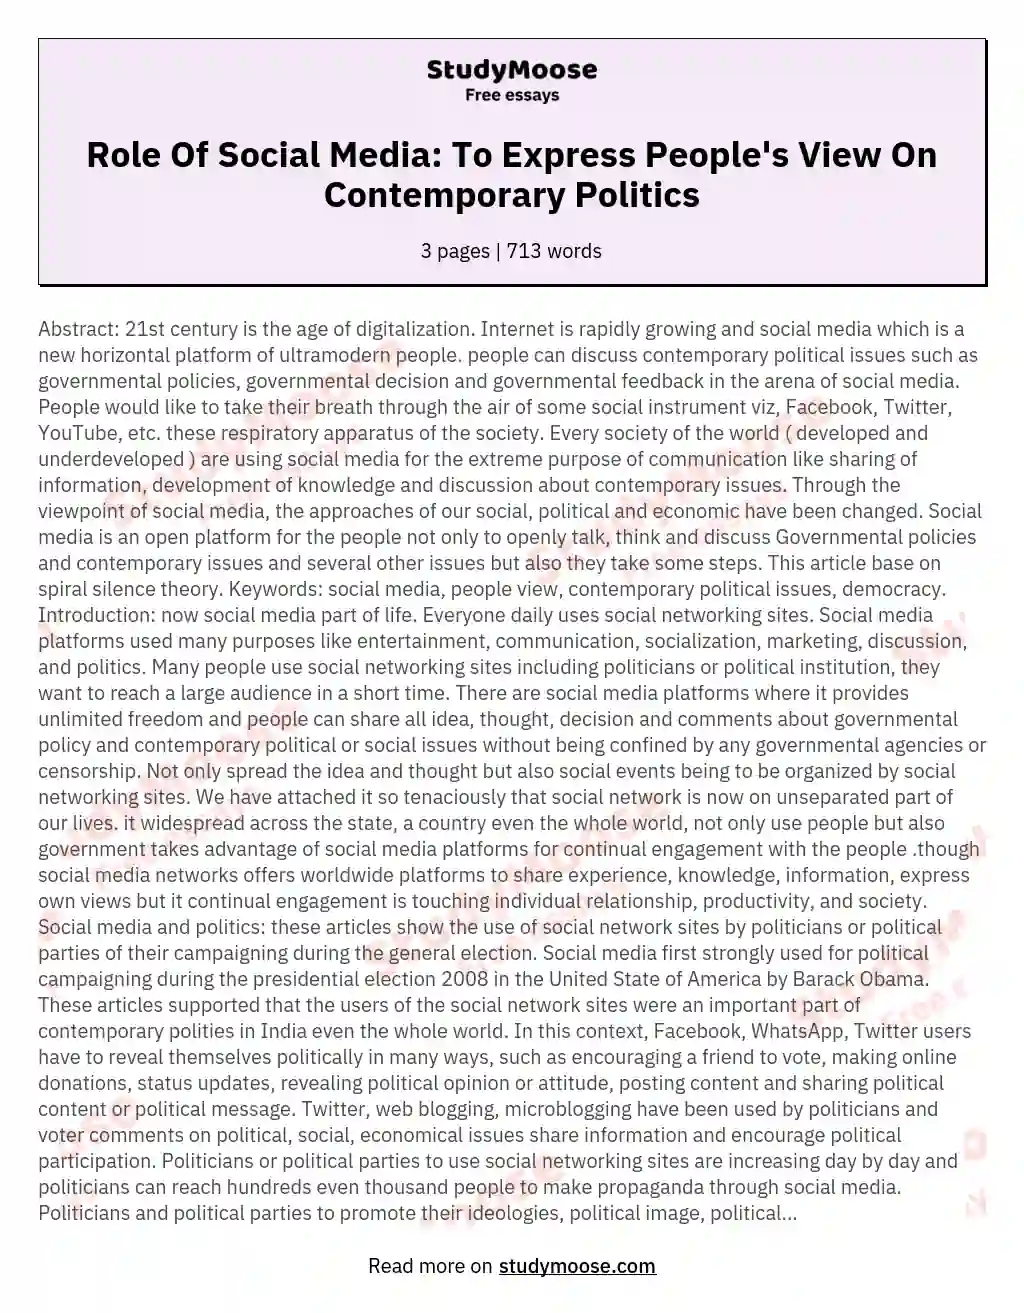 Role Of Social Media: To Express People's View On Contemporary Politics essay